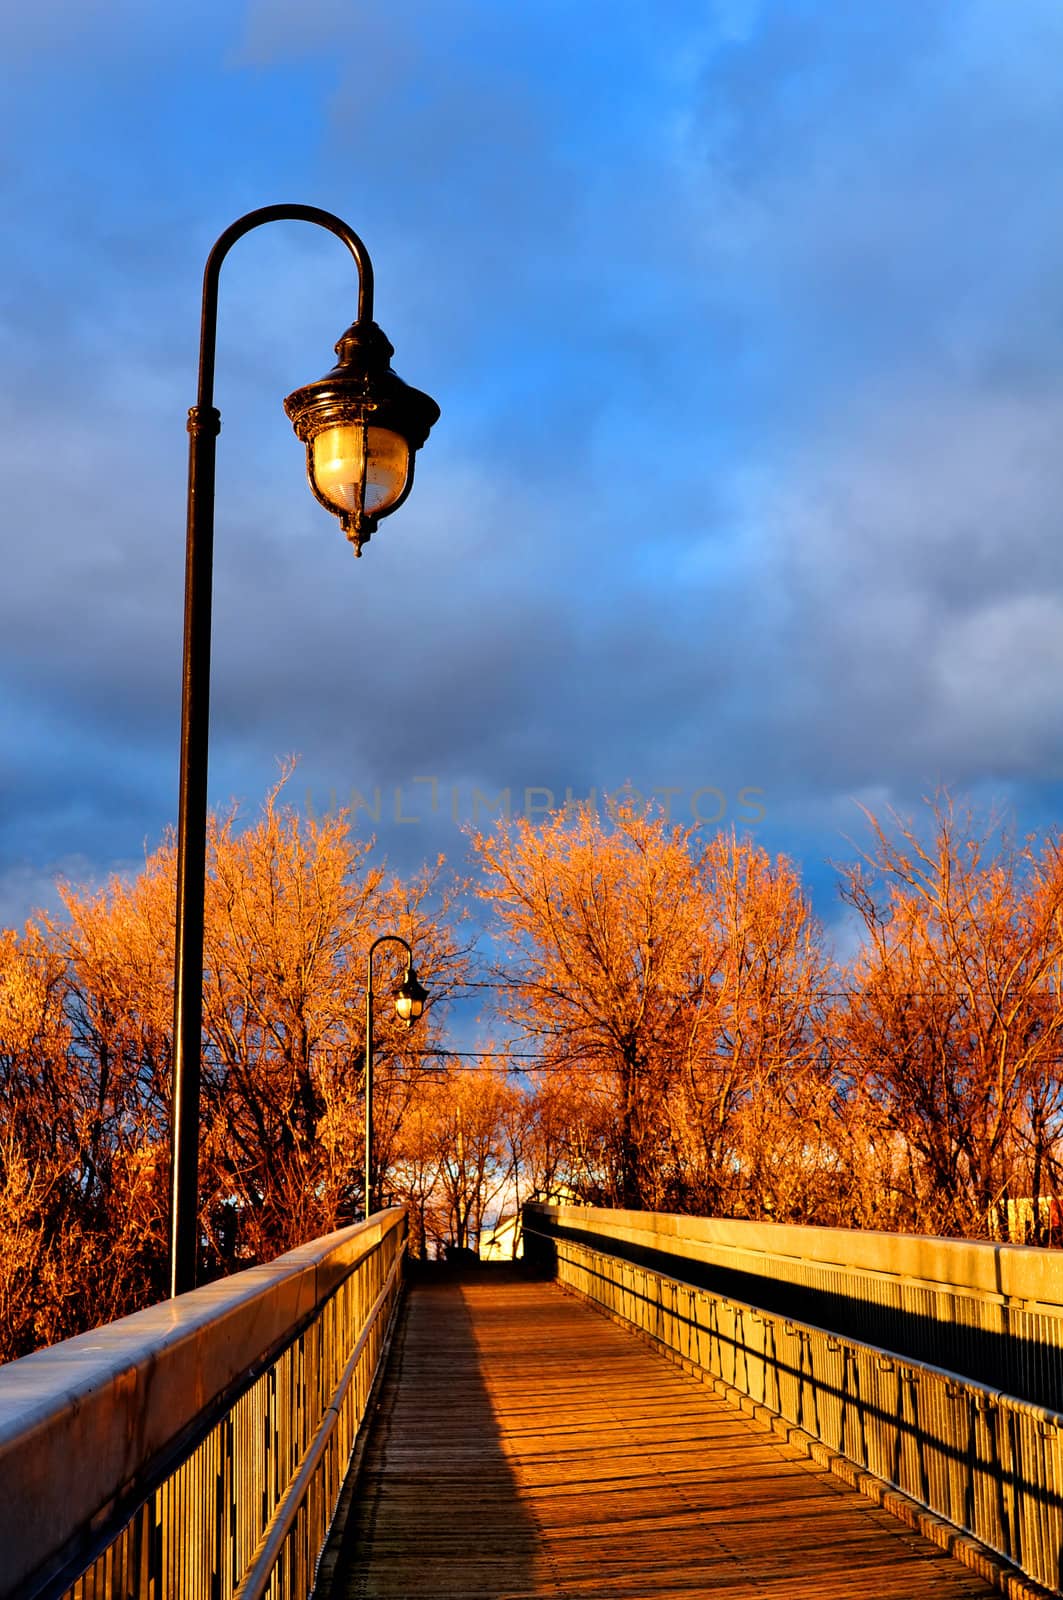 Sun setting over the wooden bridge of a small town on a autumn day.